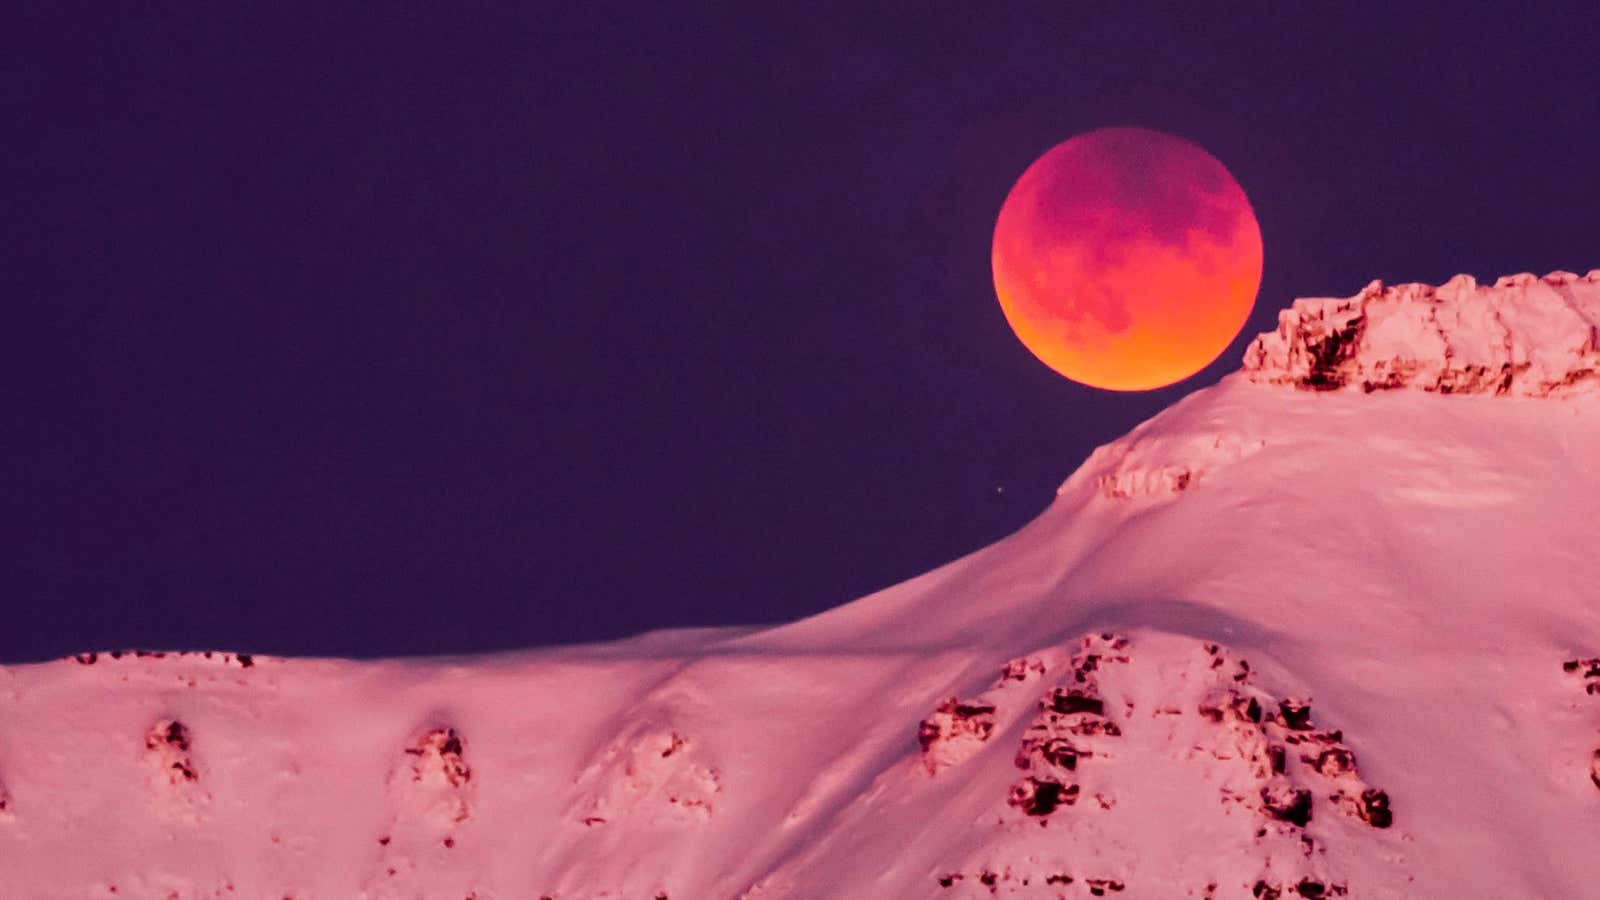 The blood moon matters most to those who look up every night.